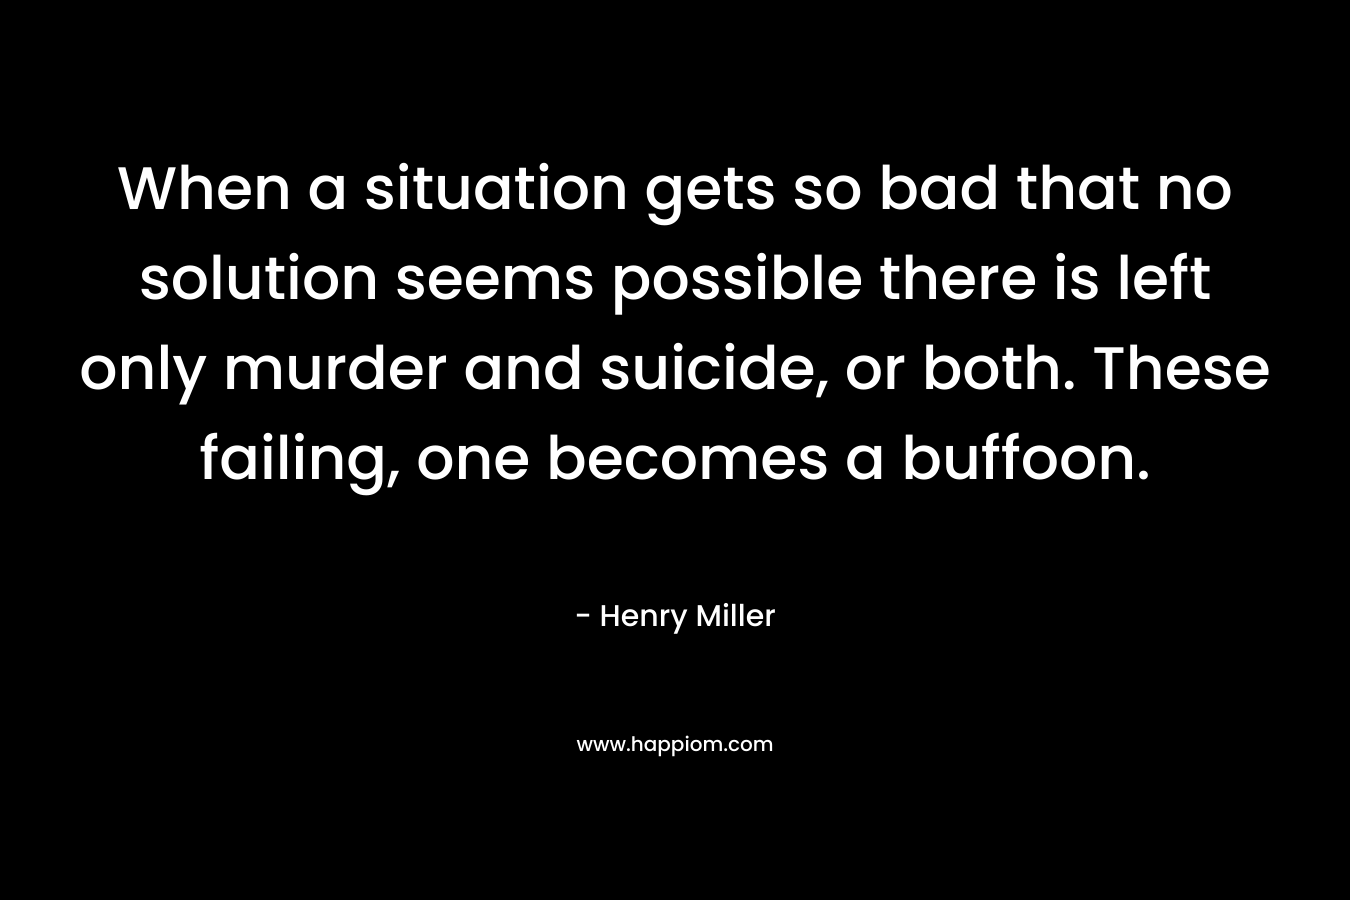 When a situation gets so bad that no solution seems possible there is left only murder and suicide, or both. These failing, one becomes a buffoon. – Henry Miller